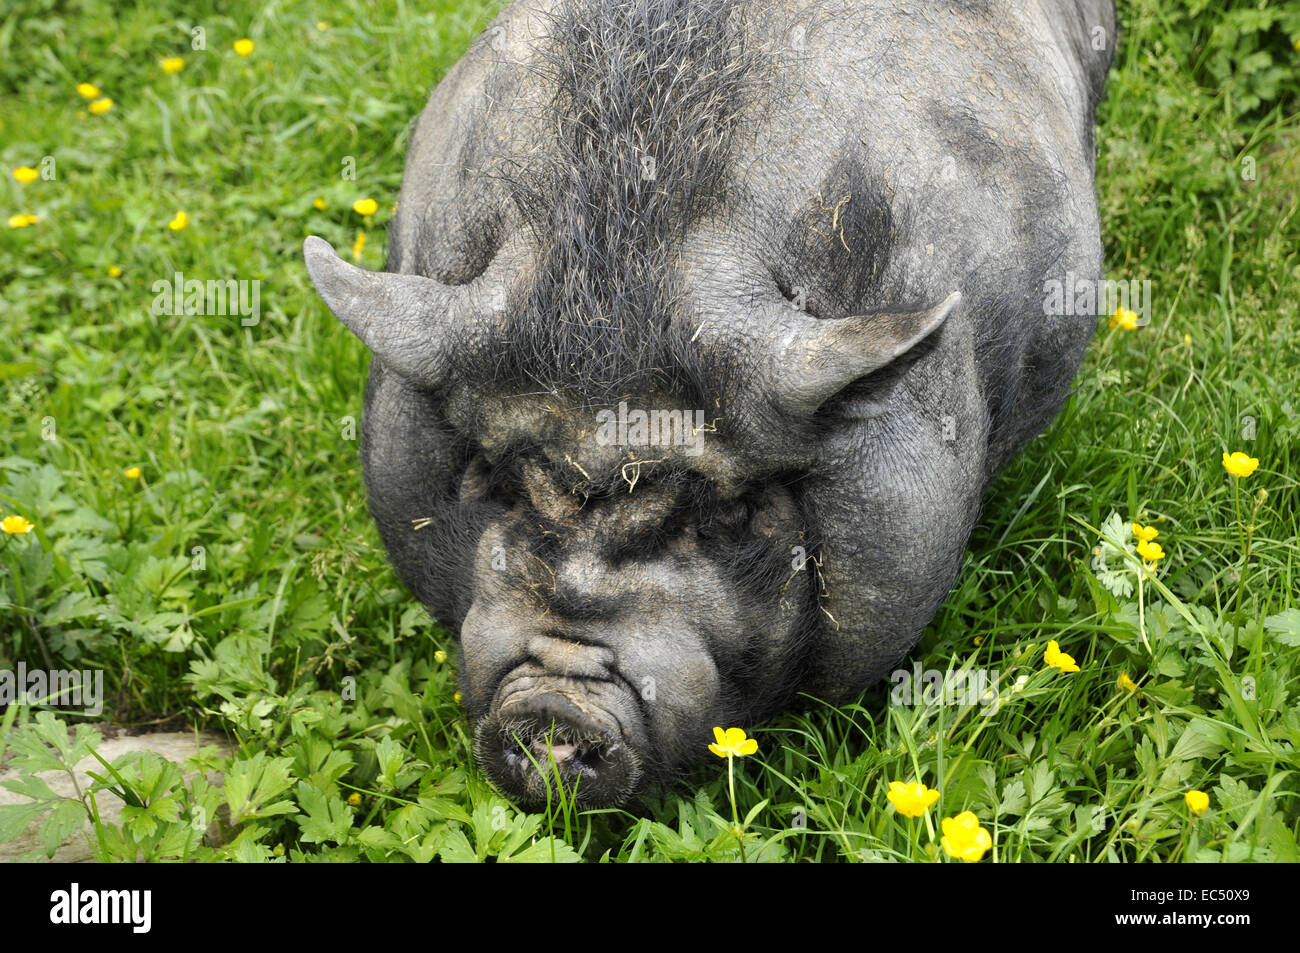 Pot-bellied pig Stock Photo